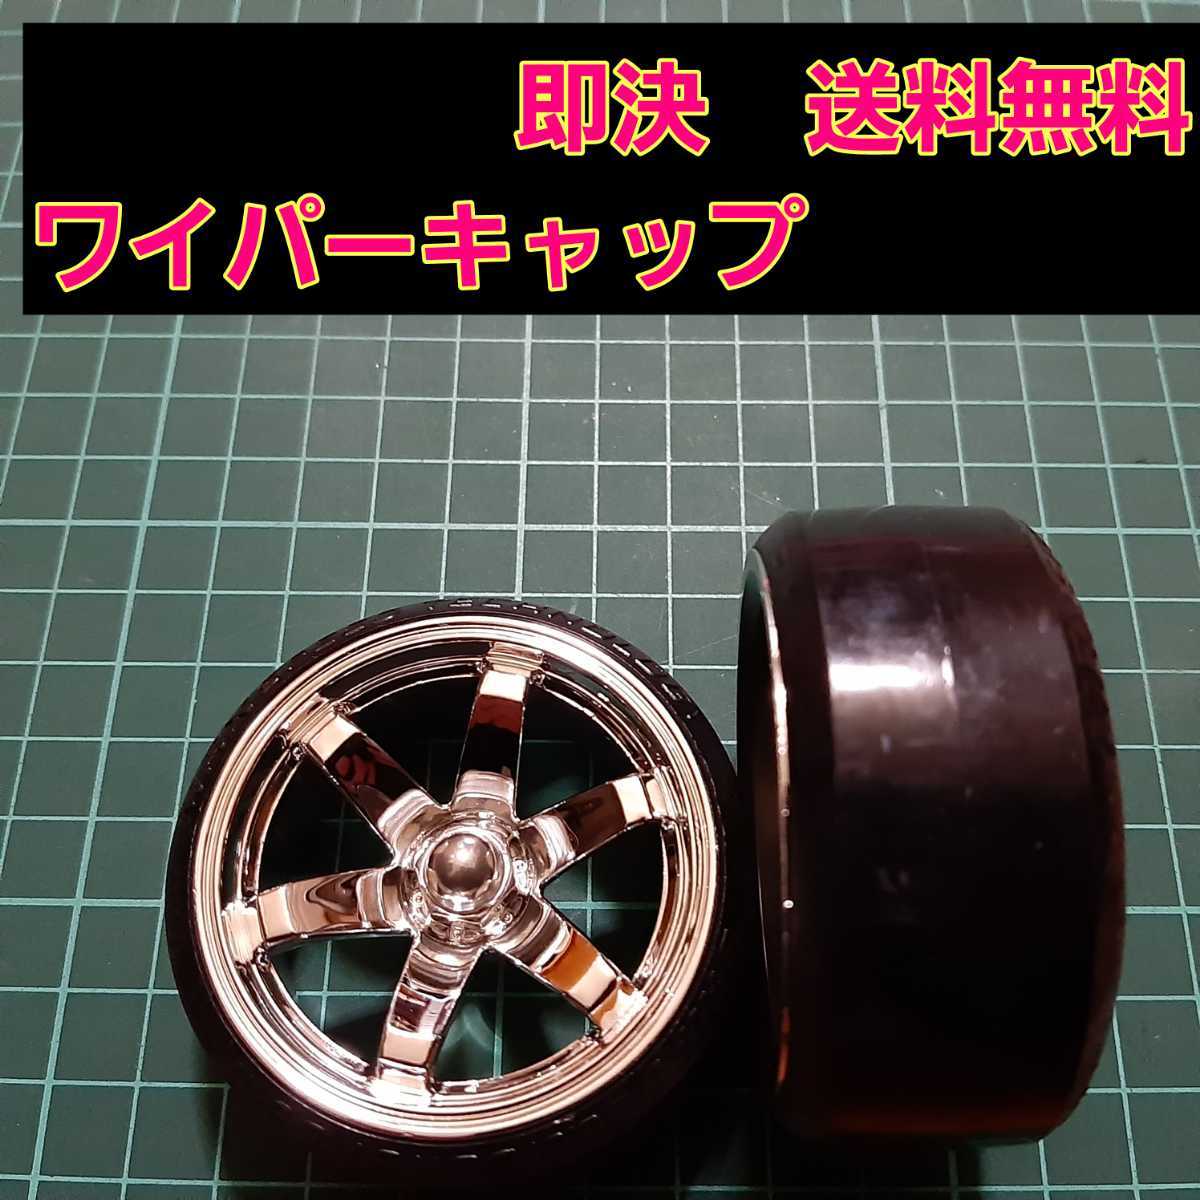  prompt decision { free shipping } silver plating rear wiper cap 1 piece TE37 BBS Every Lapin drift parts Silvia Suzuki Toyota 